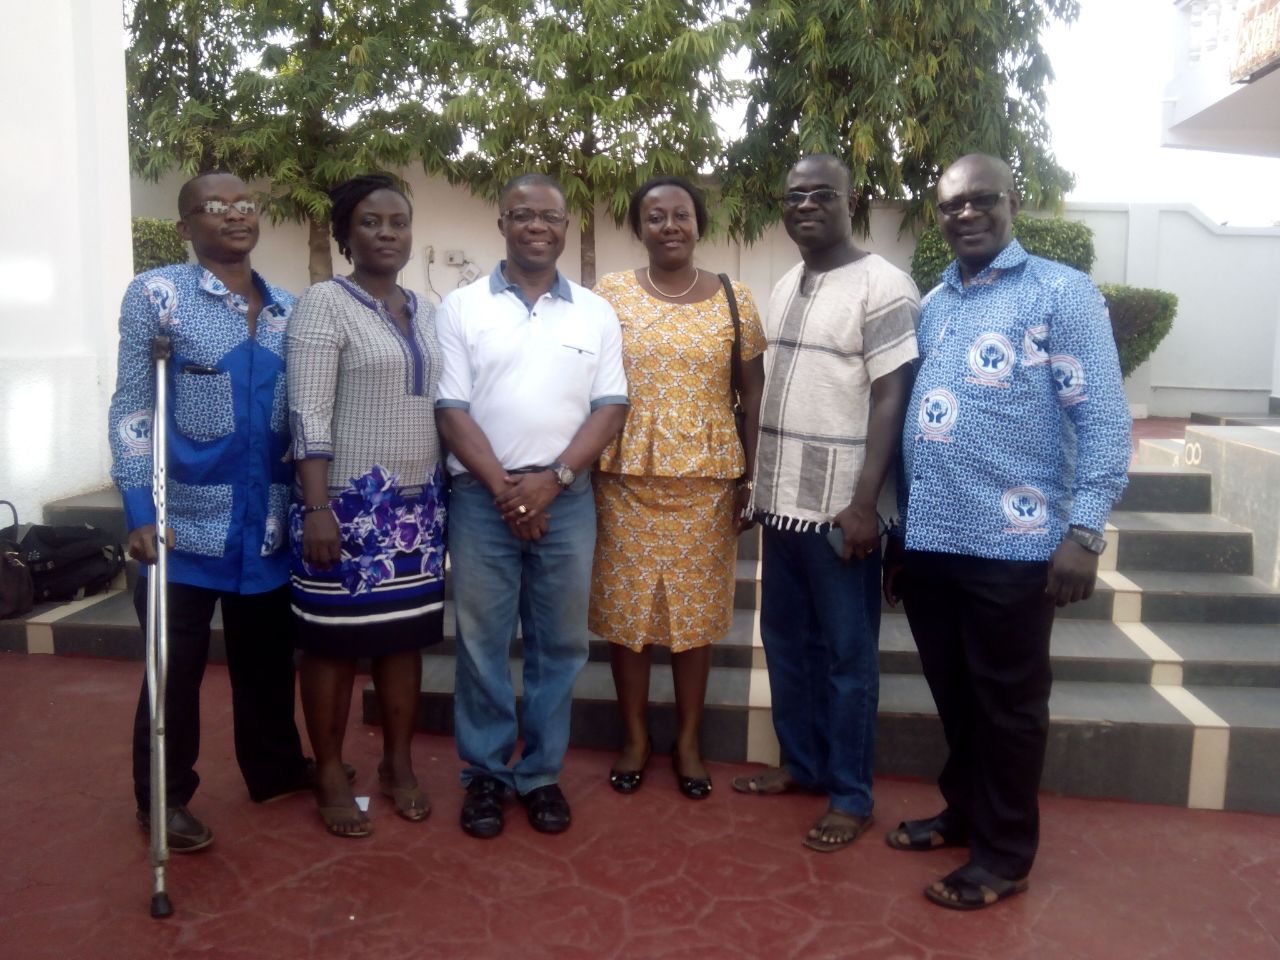 From left to Right -Mr Michael Asabere, Miss Mary Theodora Kukah, Dr Charles Anane, Mrs Christiana Boatemaa Atakora- (Manageress), Dr Anthony Enimil, Dr Frank Ankobea)